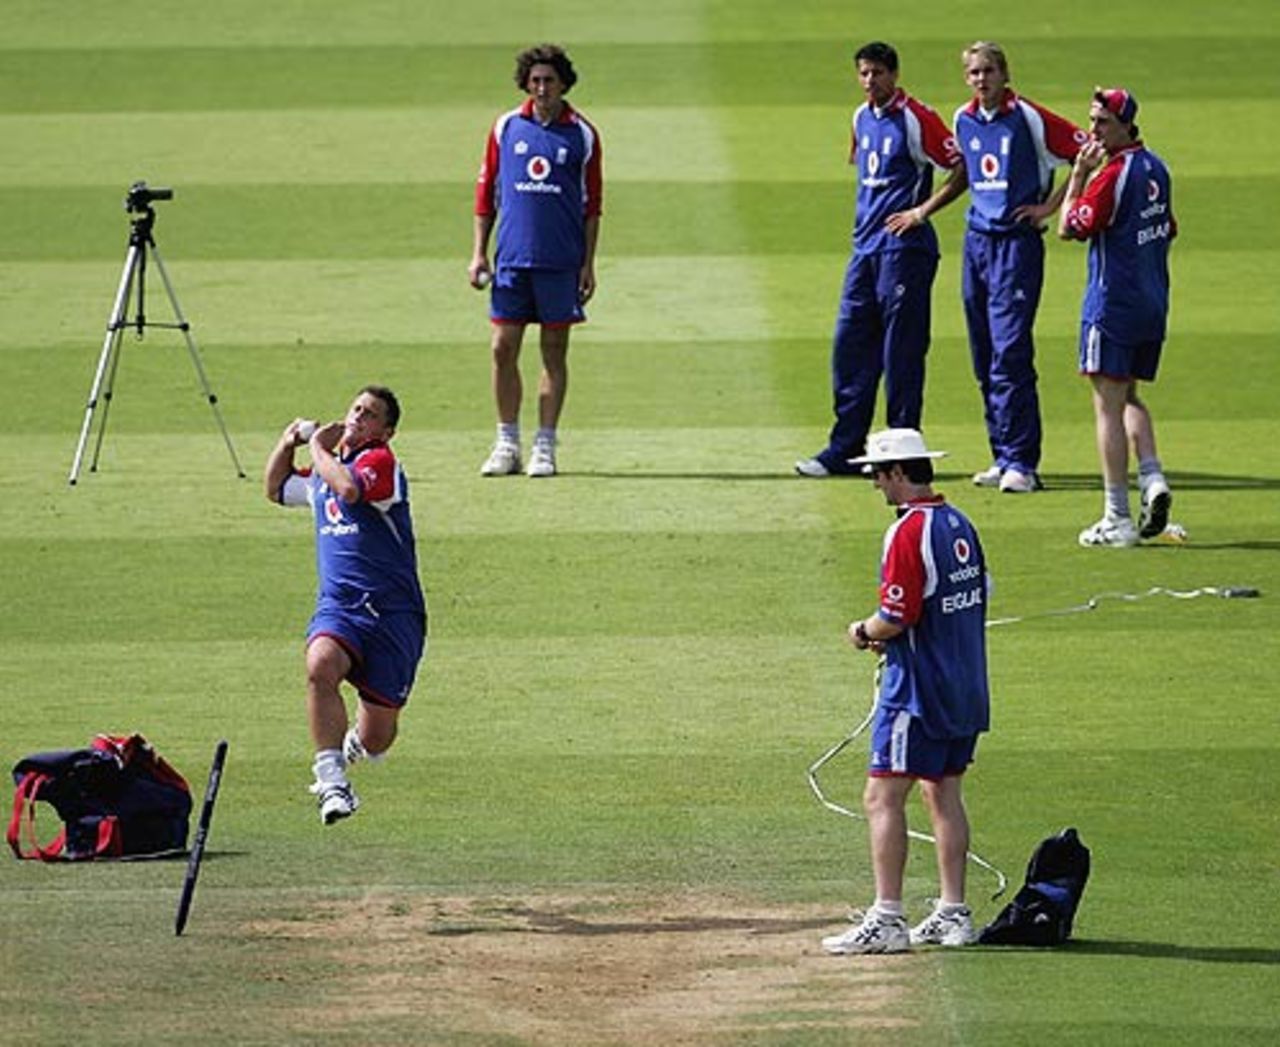 Darren Gough charges in during a practice session, London, September 1, 2006